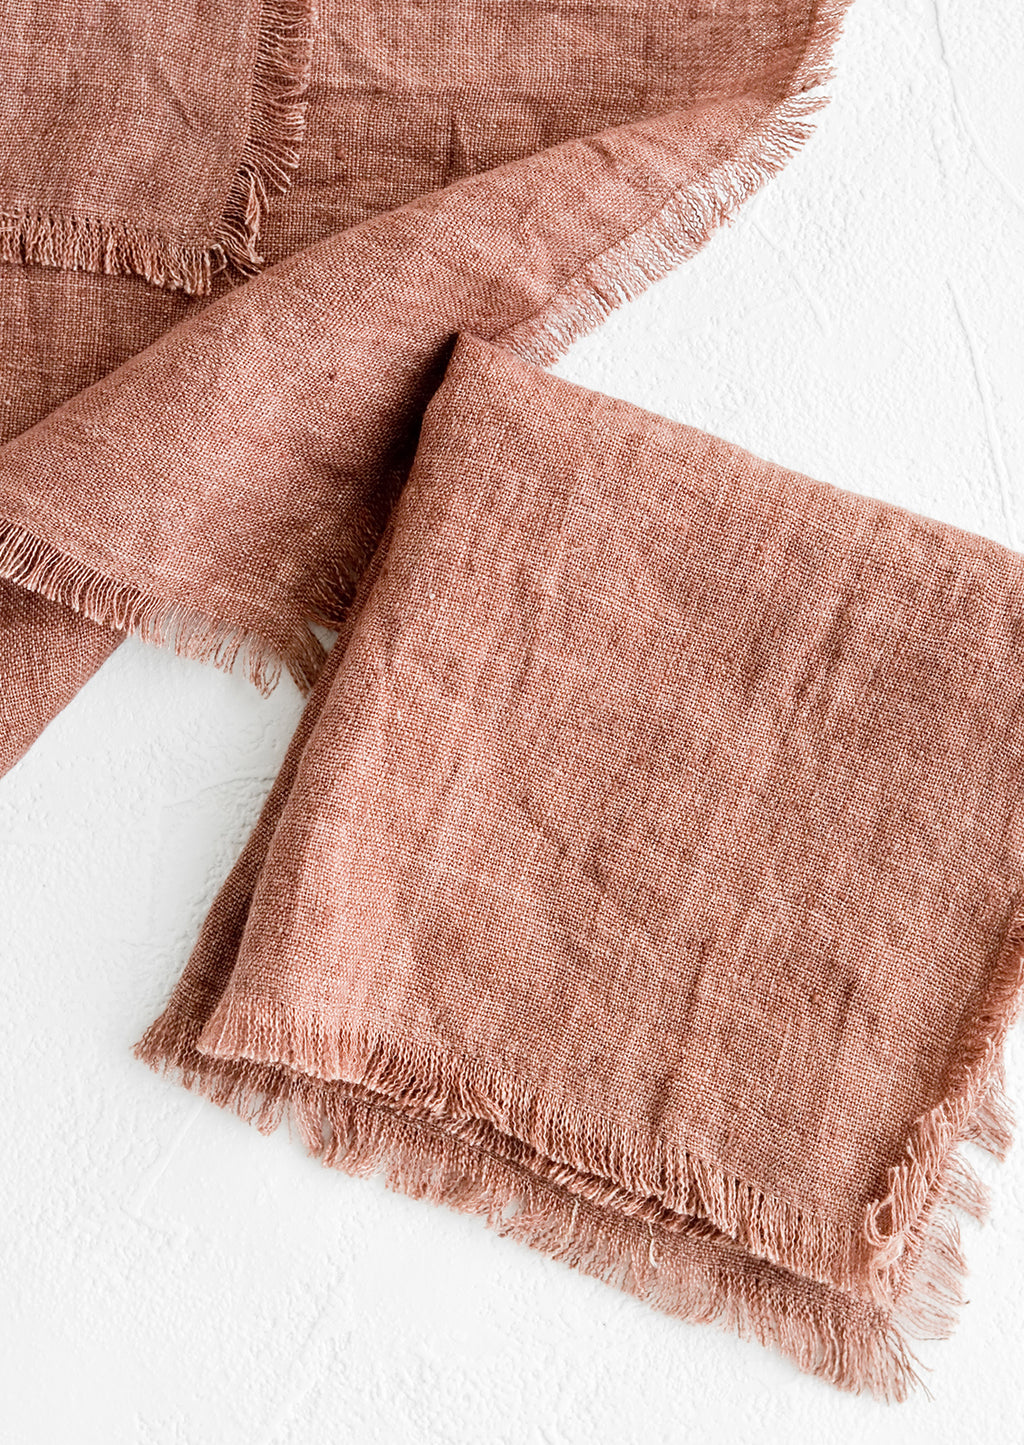 Currant: Folded currant colored linen napkins with frayed edges.